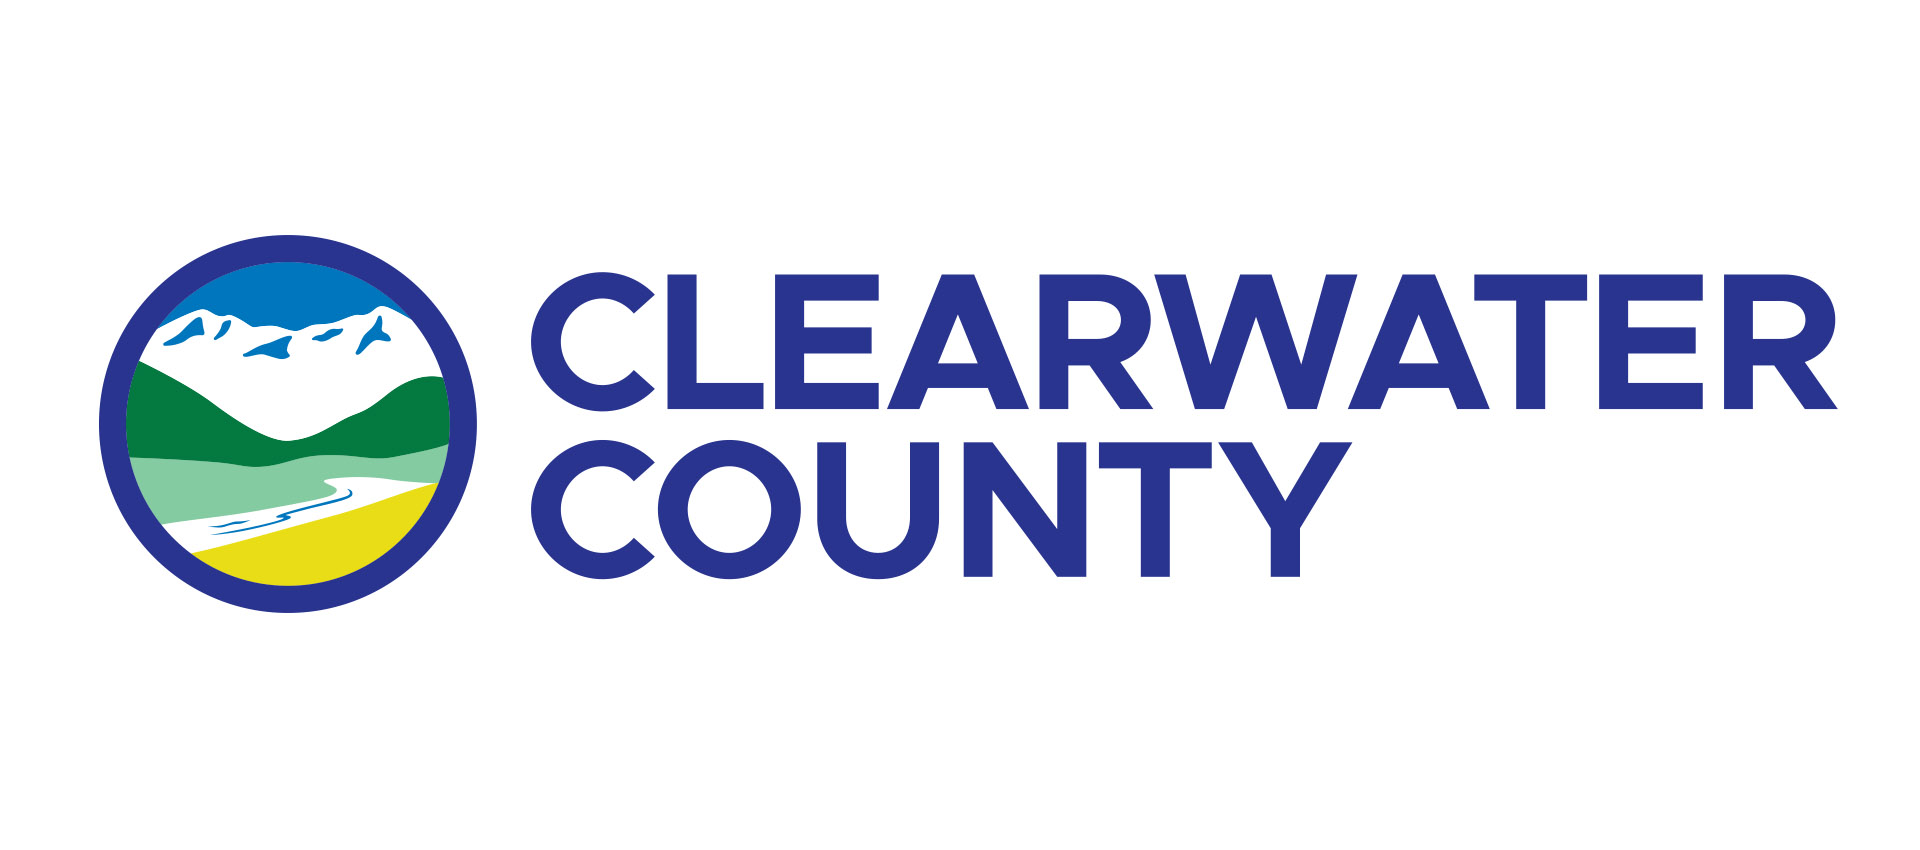 Clearwater County logo on white